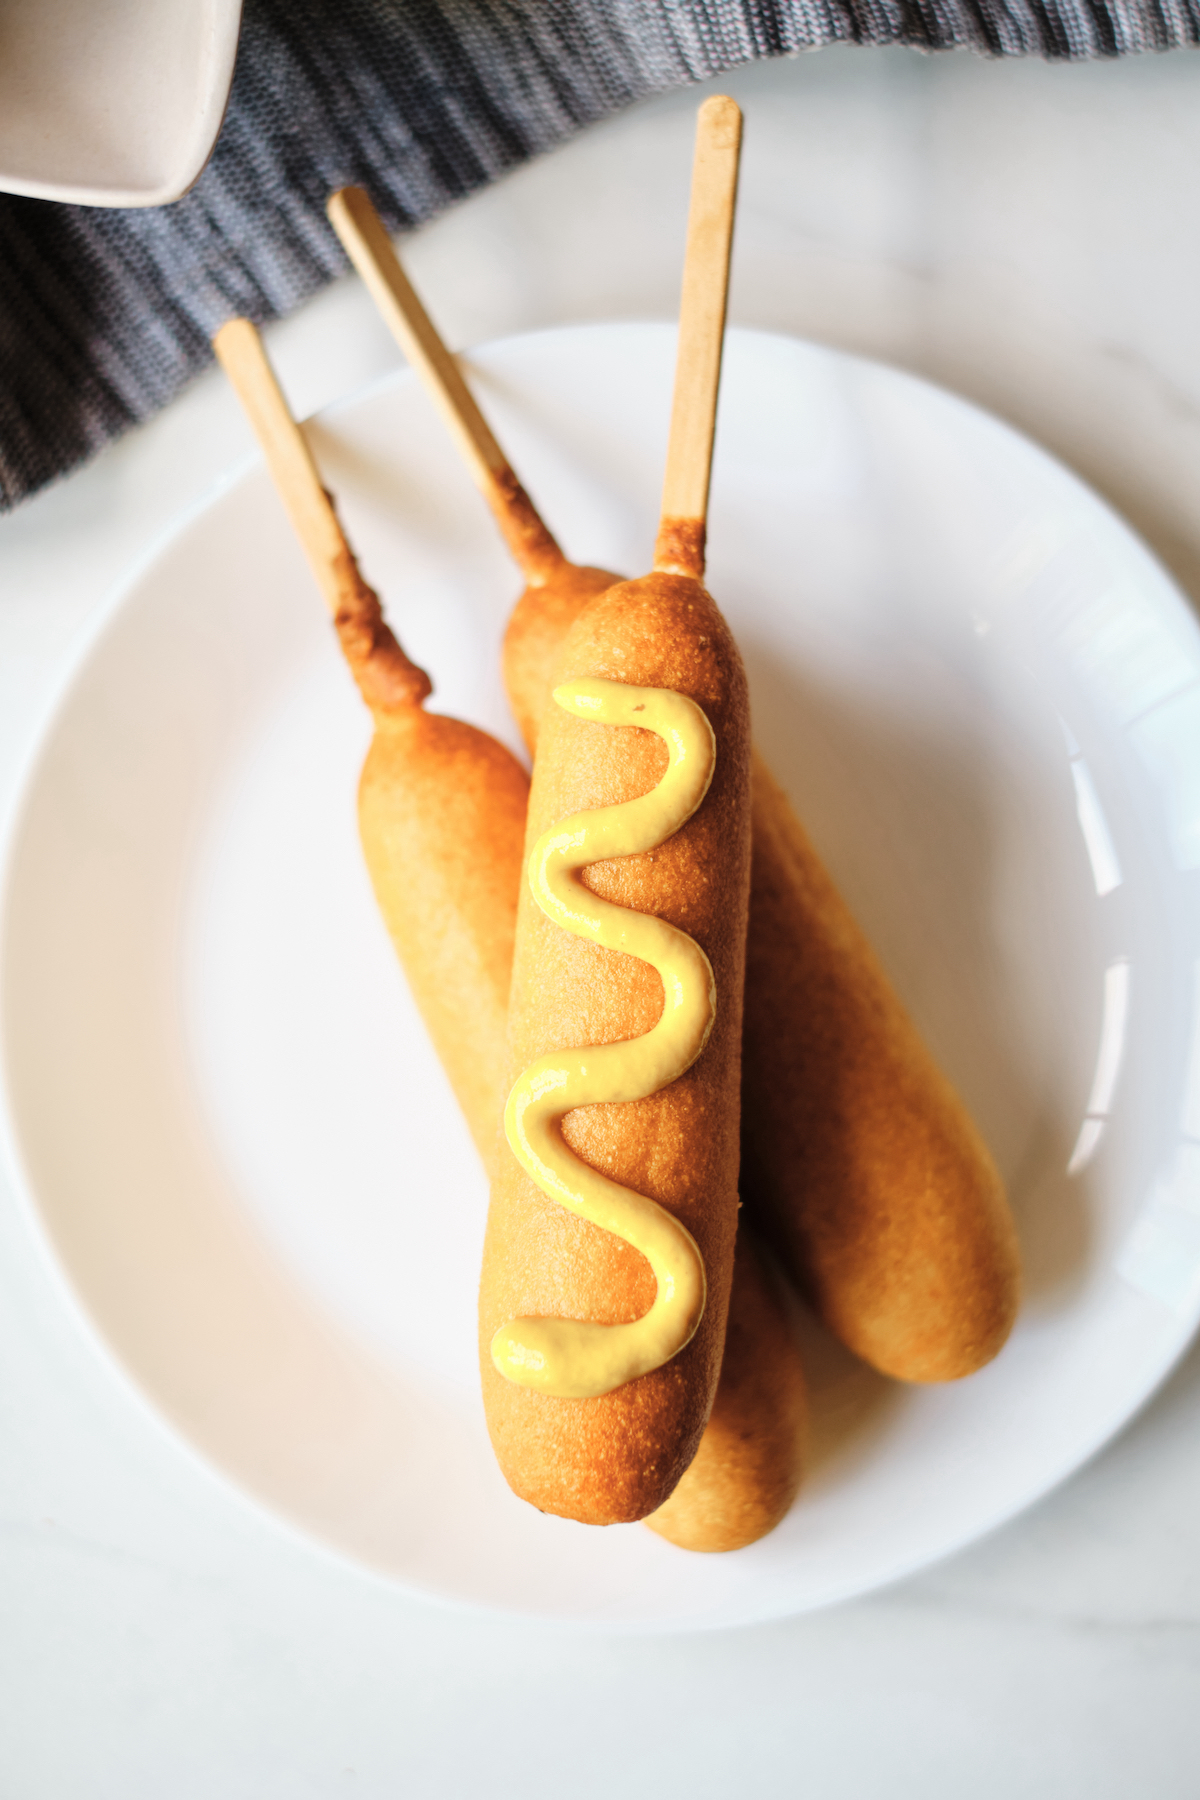 How do you cook frozen corn dogs in an air fryer?